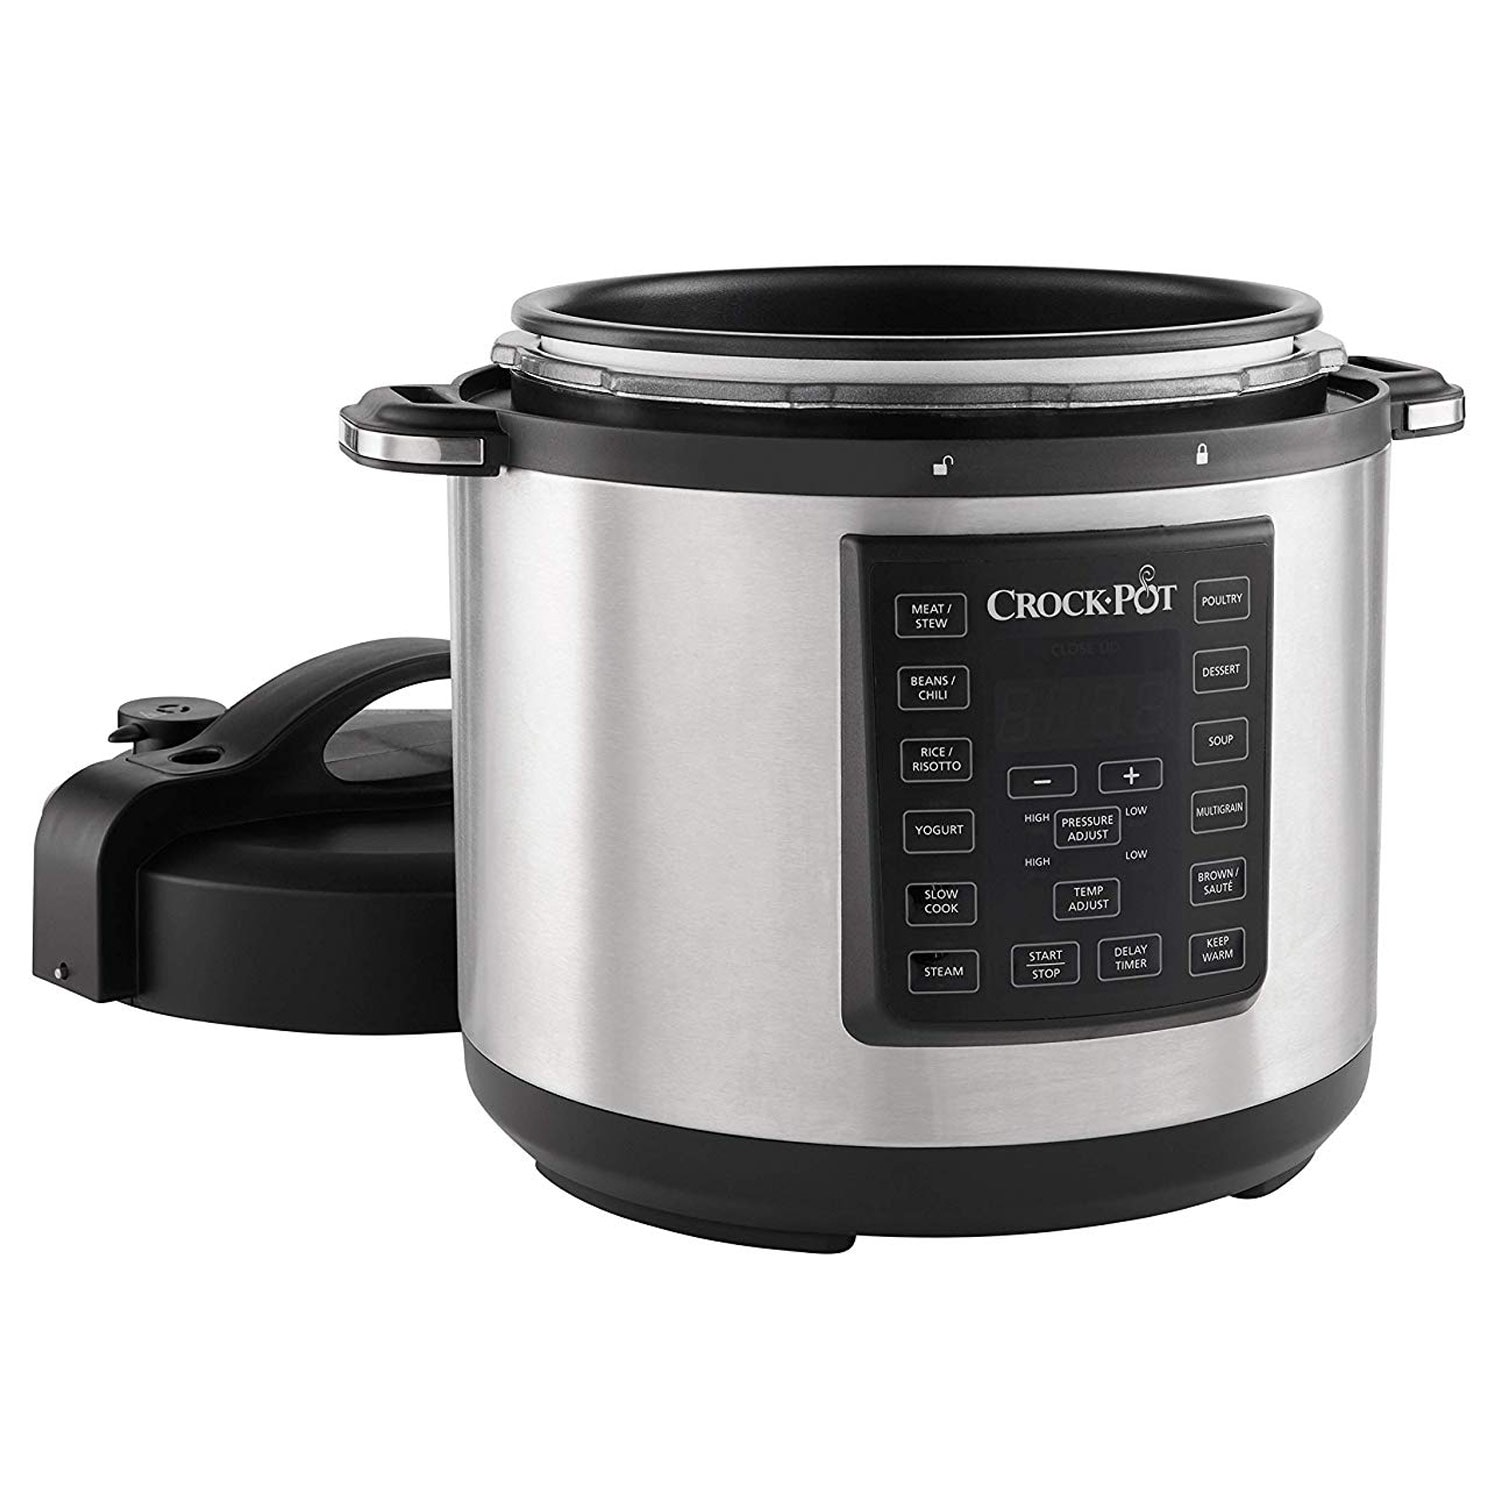 https://ak1.ostkcdn.com/images/products/is/images/direct/5fd15ee382f69bb1f1bfdeee4f52b368c2a61d20/Crock-Pot-8-In-1-Multi-Use-Express-Cooker%2C-Silver-Black%2C-6-Quarts.jpg